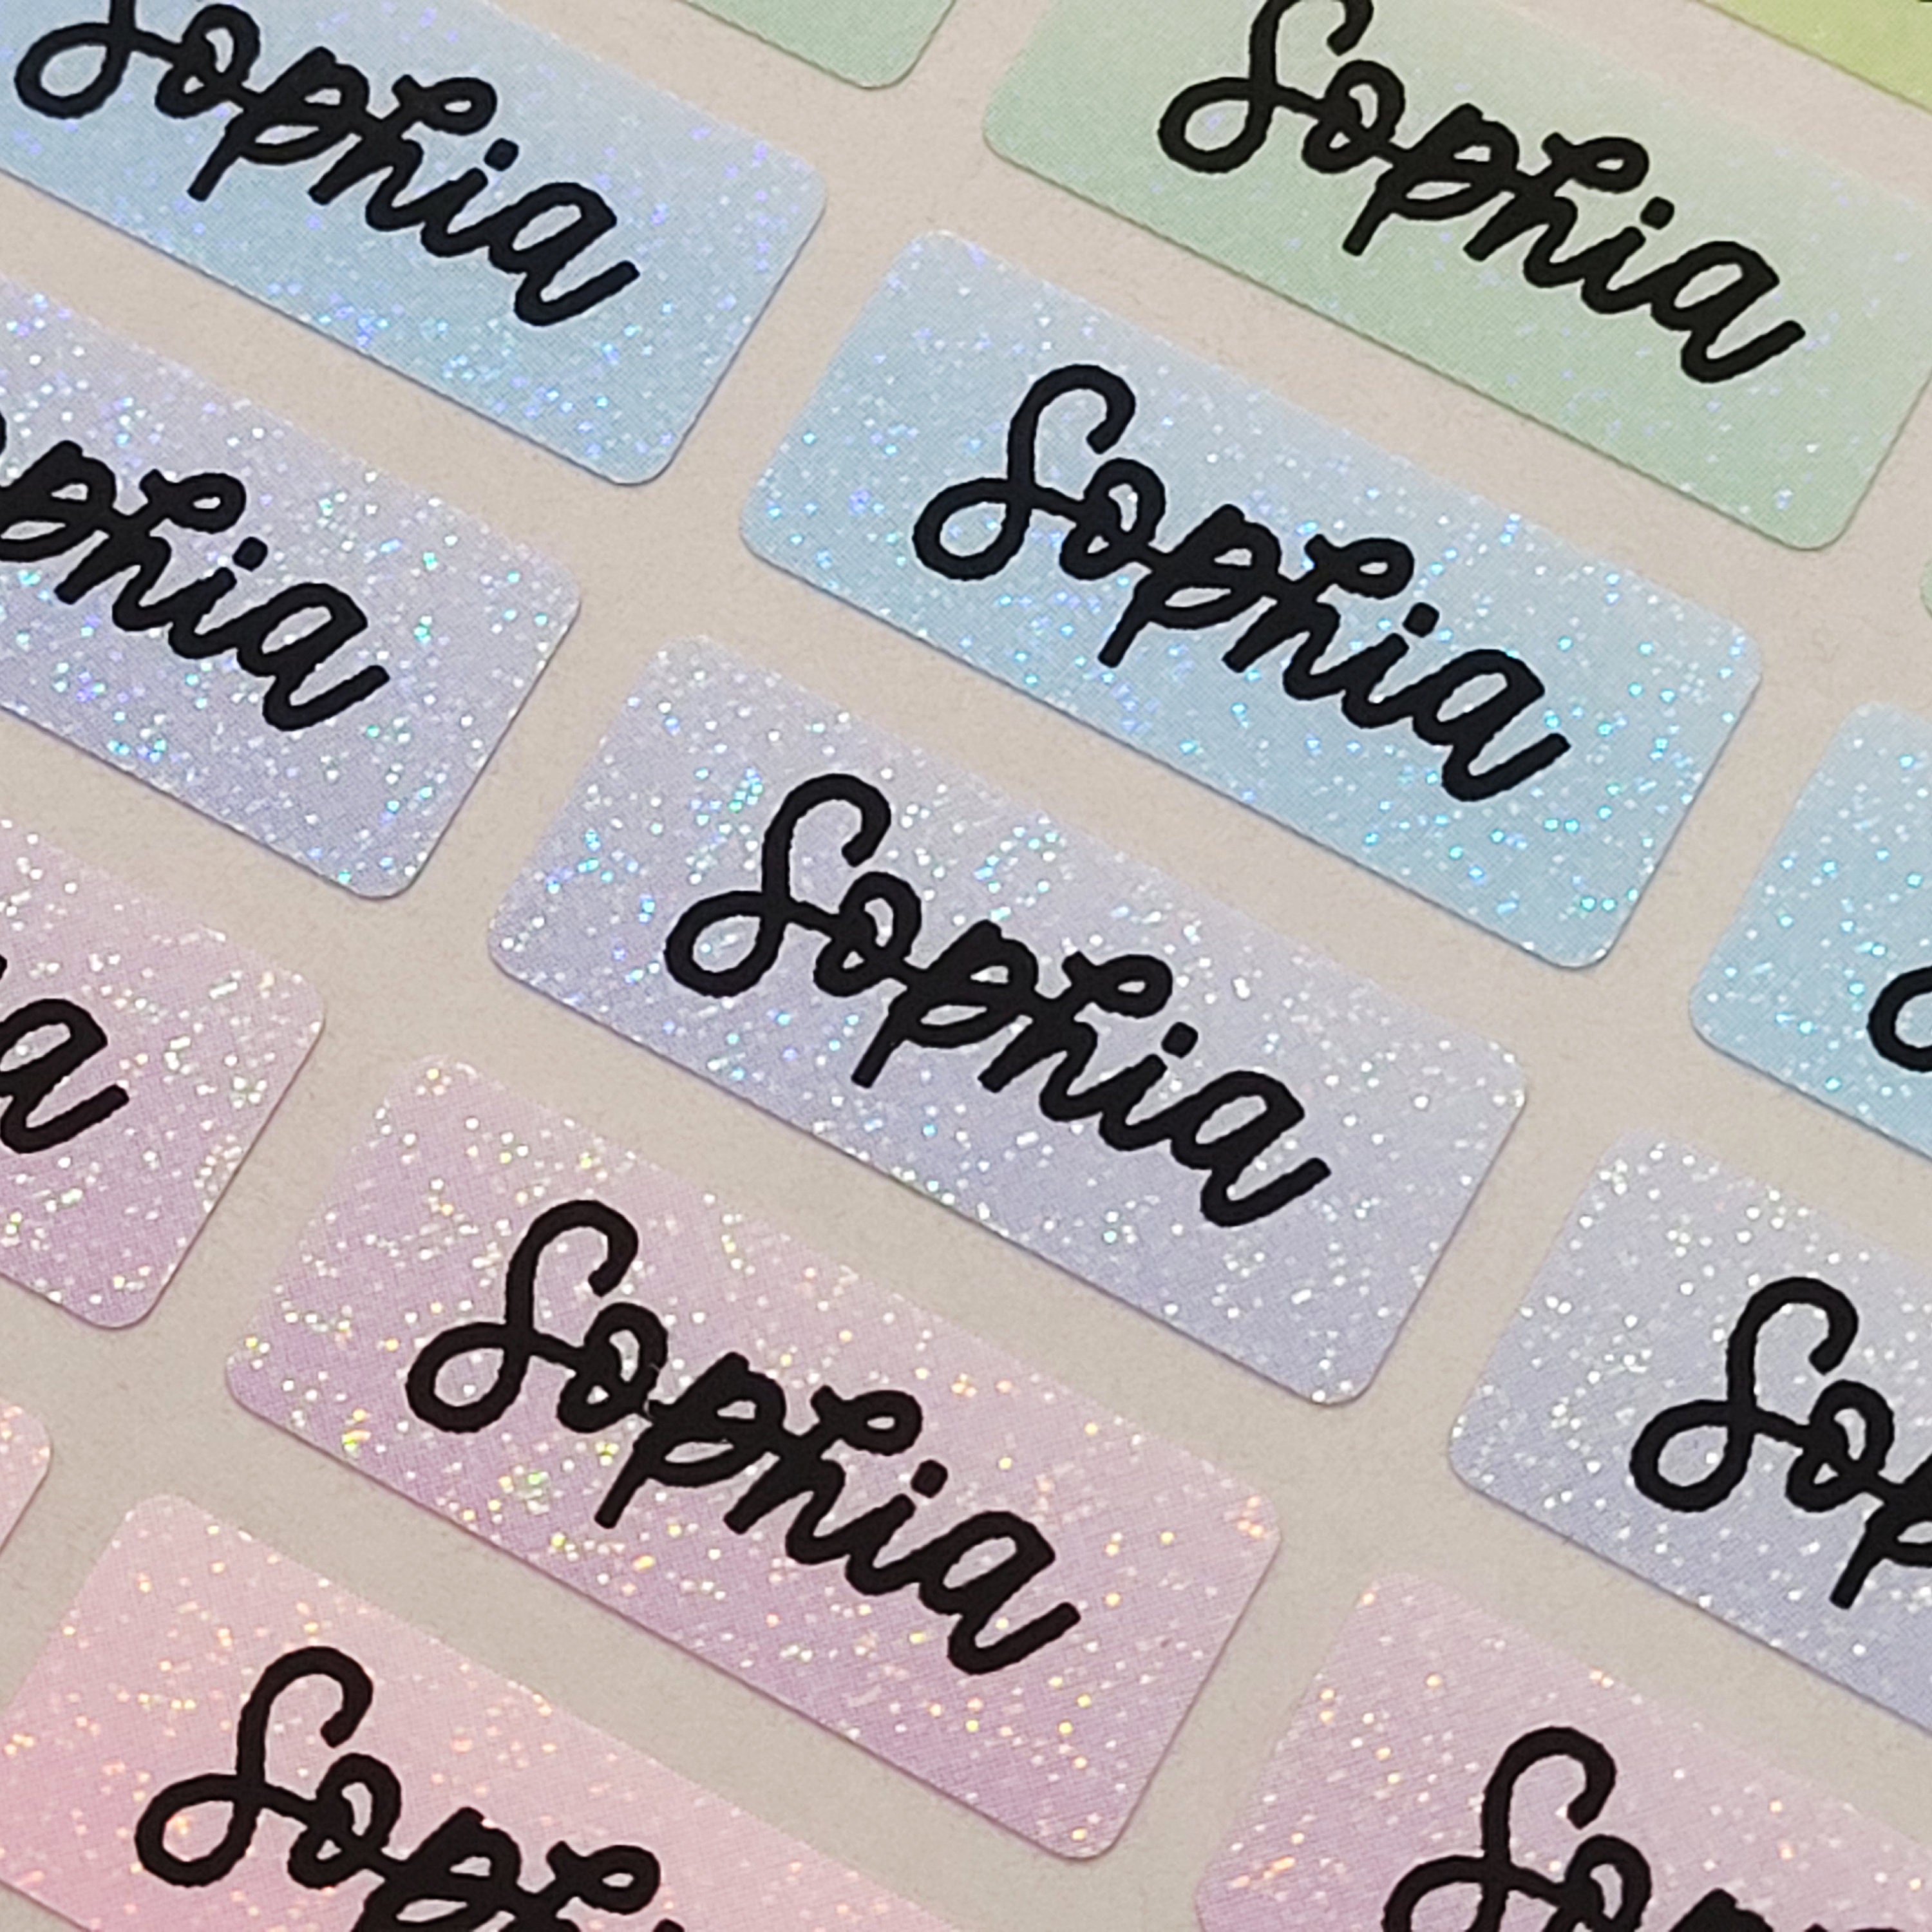 Self-inking Clothing Stamp, Personalized Fabric Stamp, Kids Name